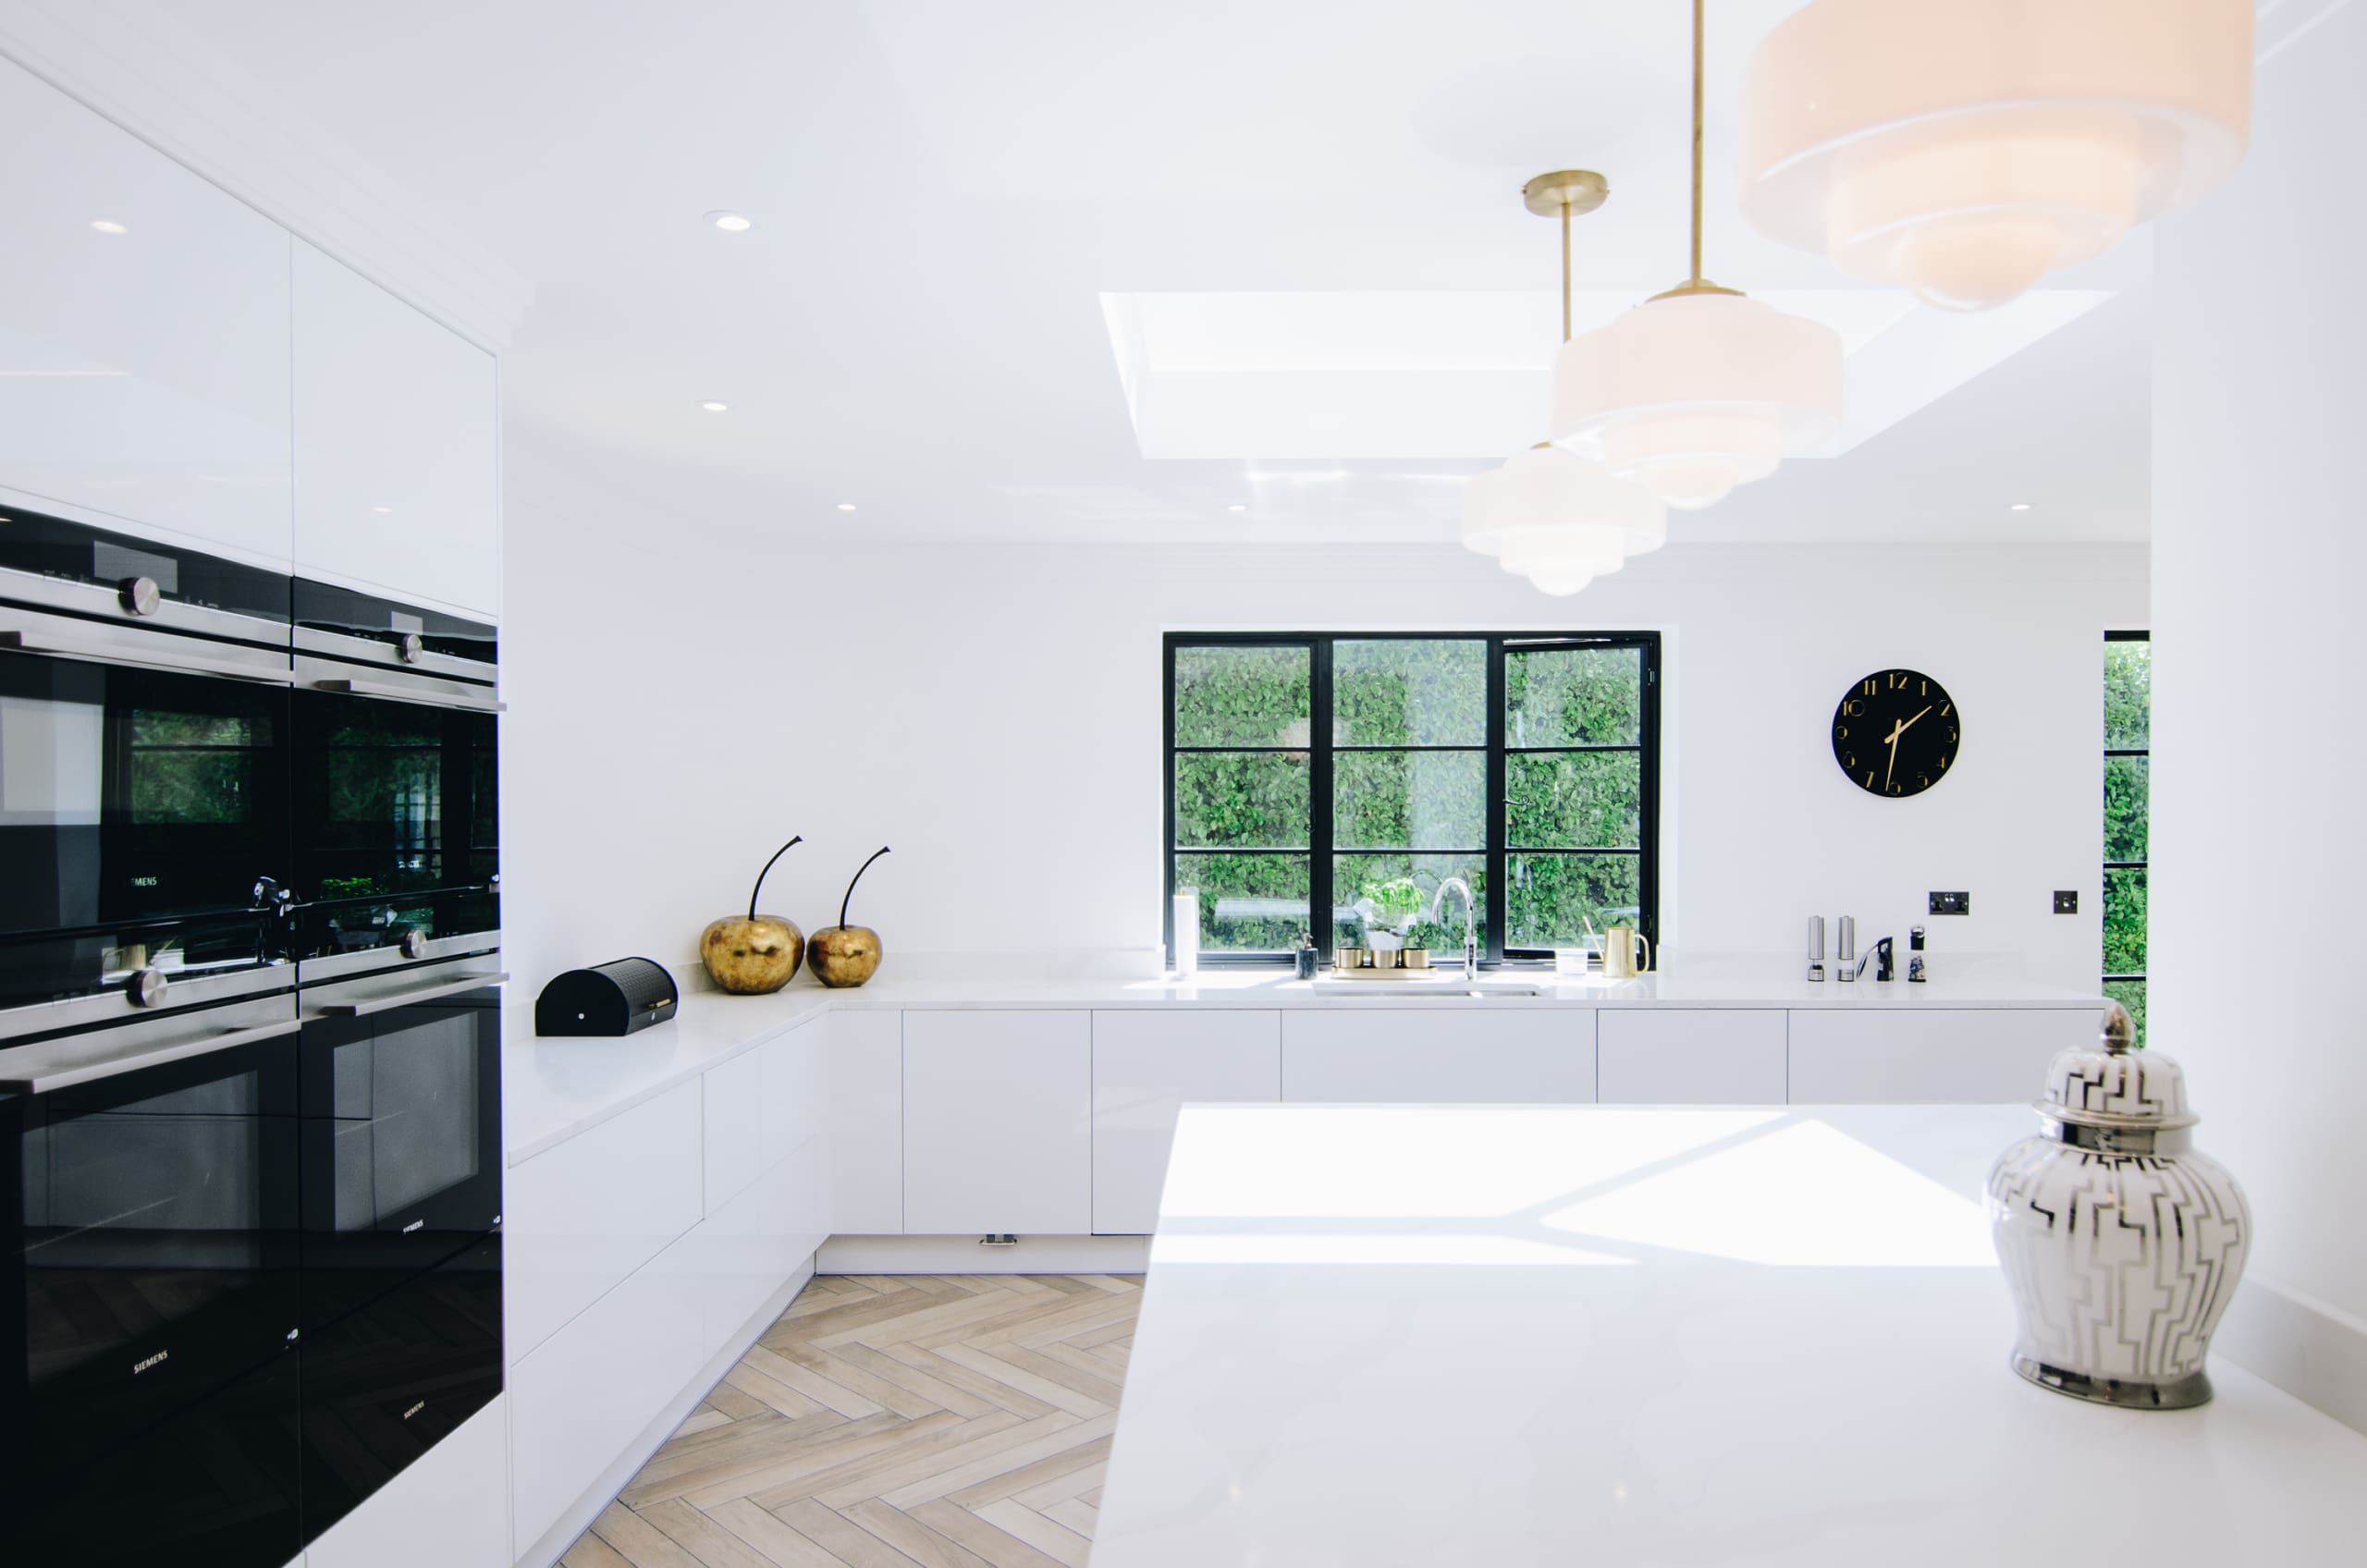 Beautiful art deco property with aluminium windows to complement the white kitchen space.